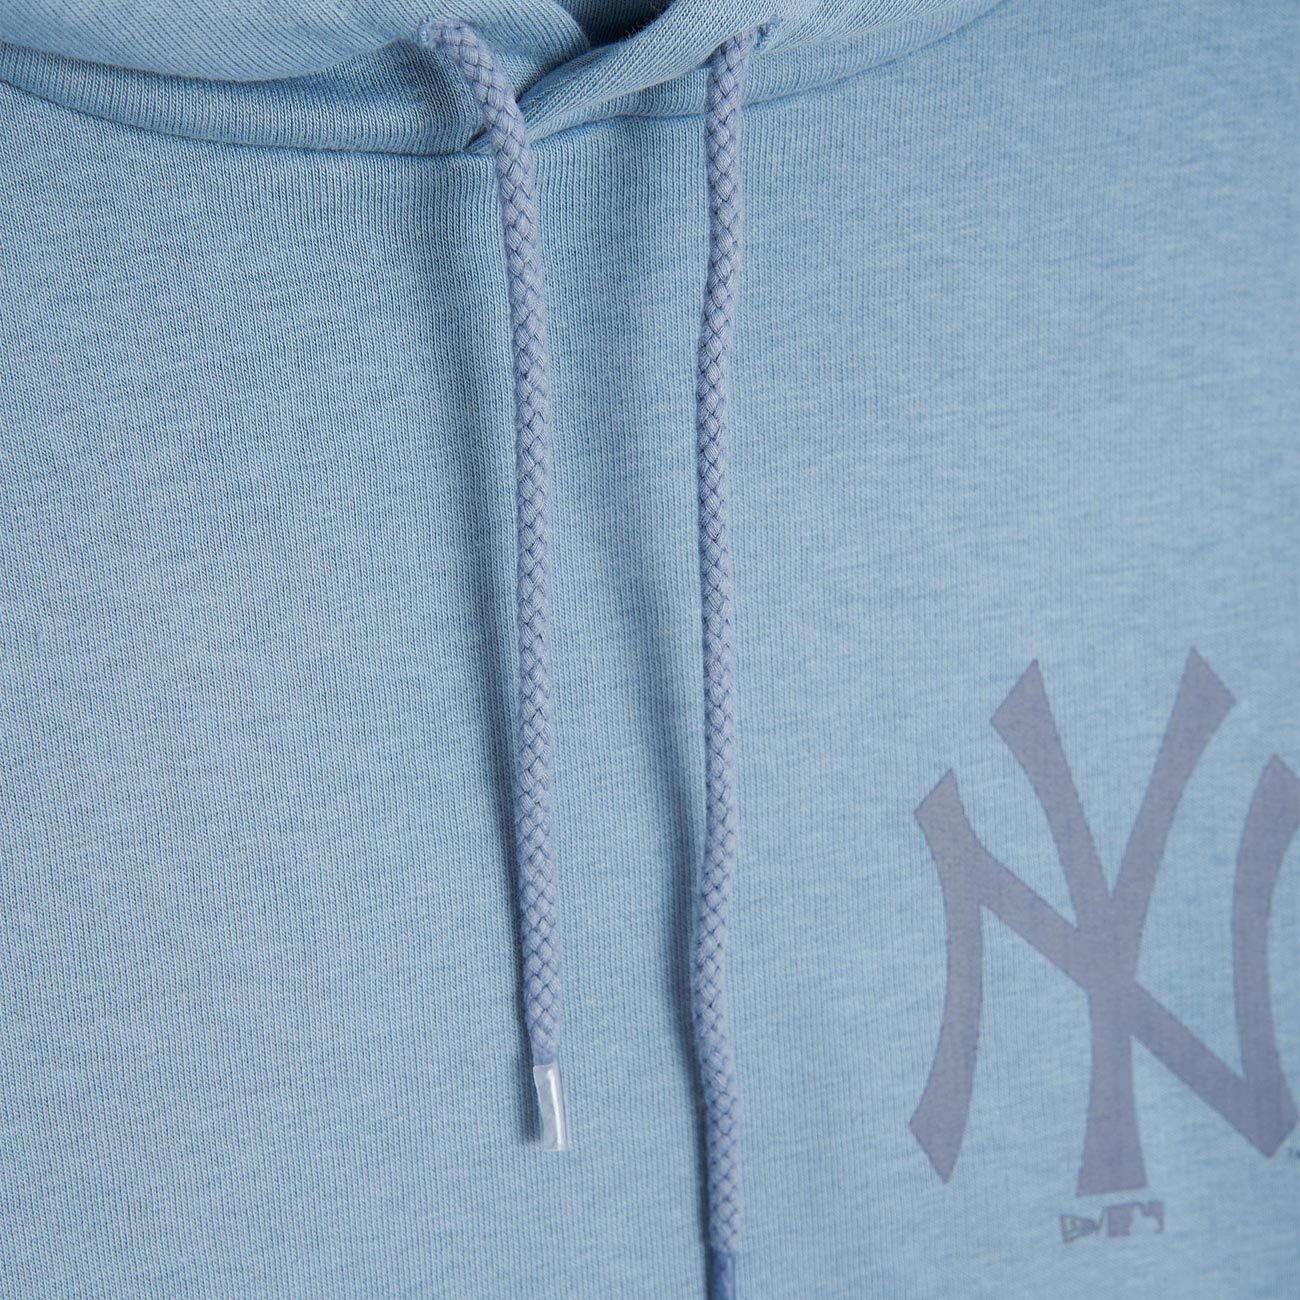 Official New York Yankees Cold Weather Gear, Yankees Hoodies